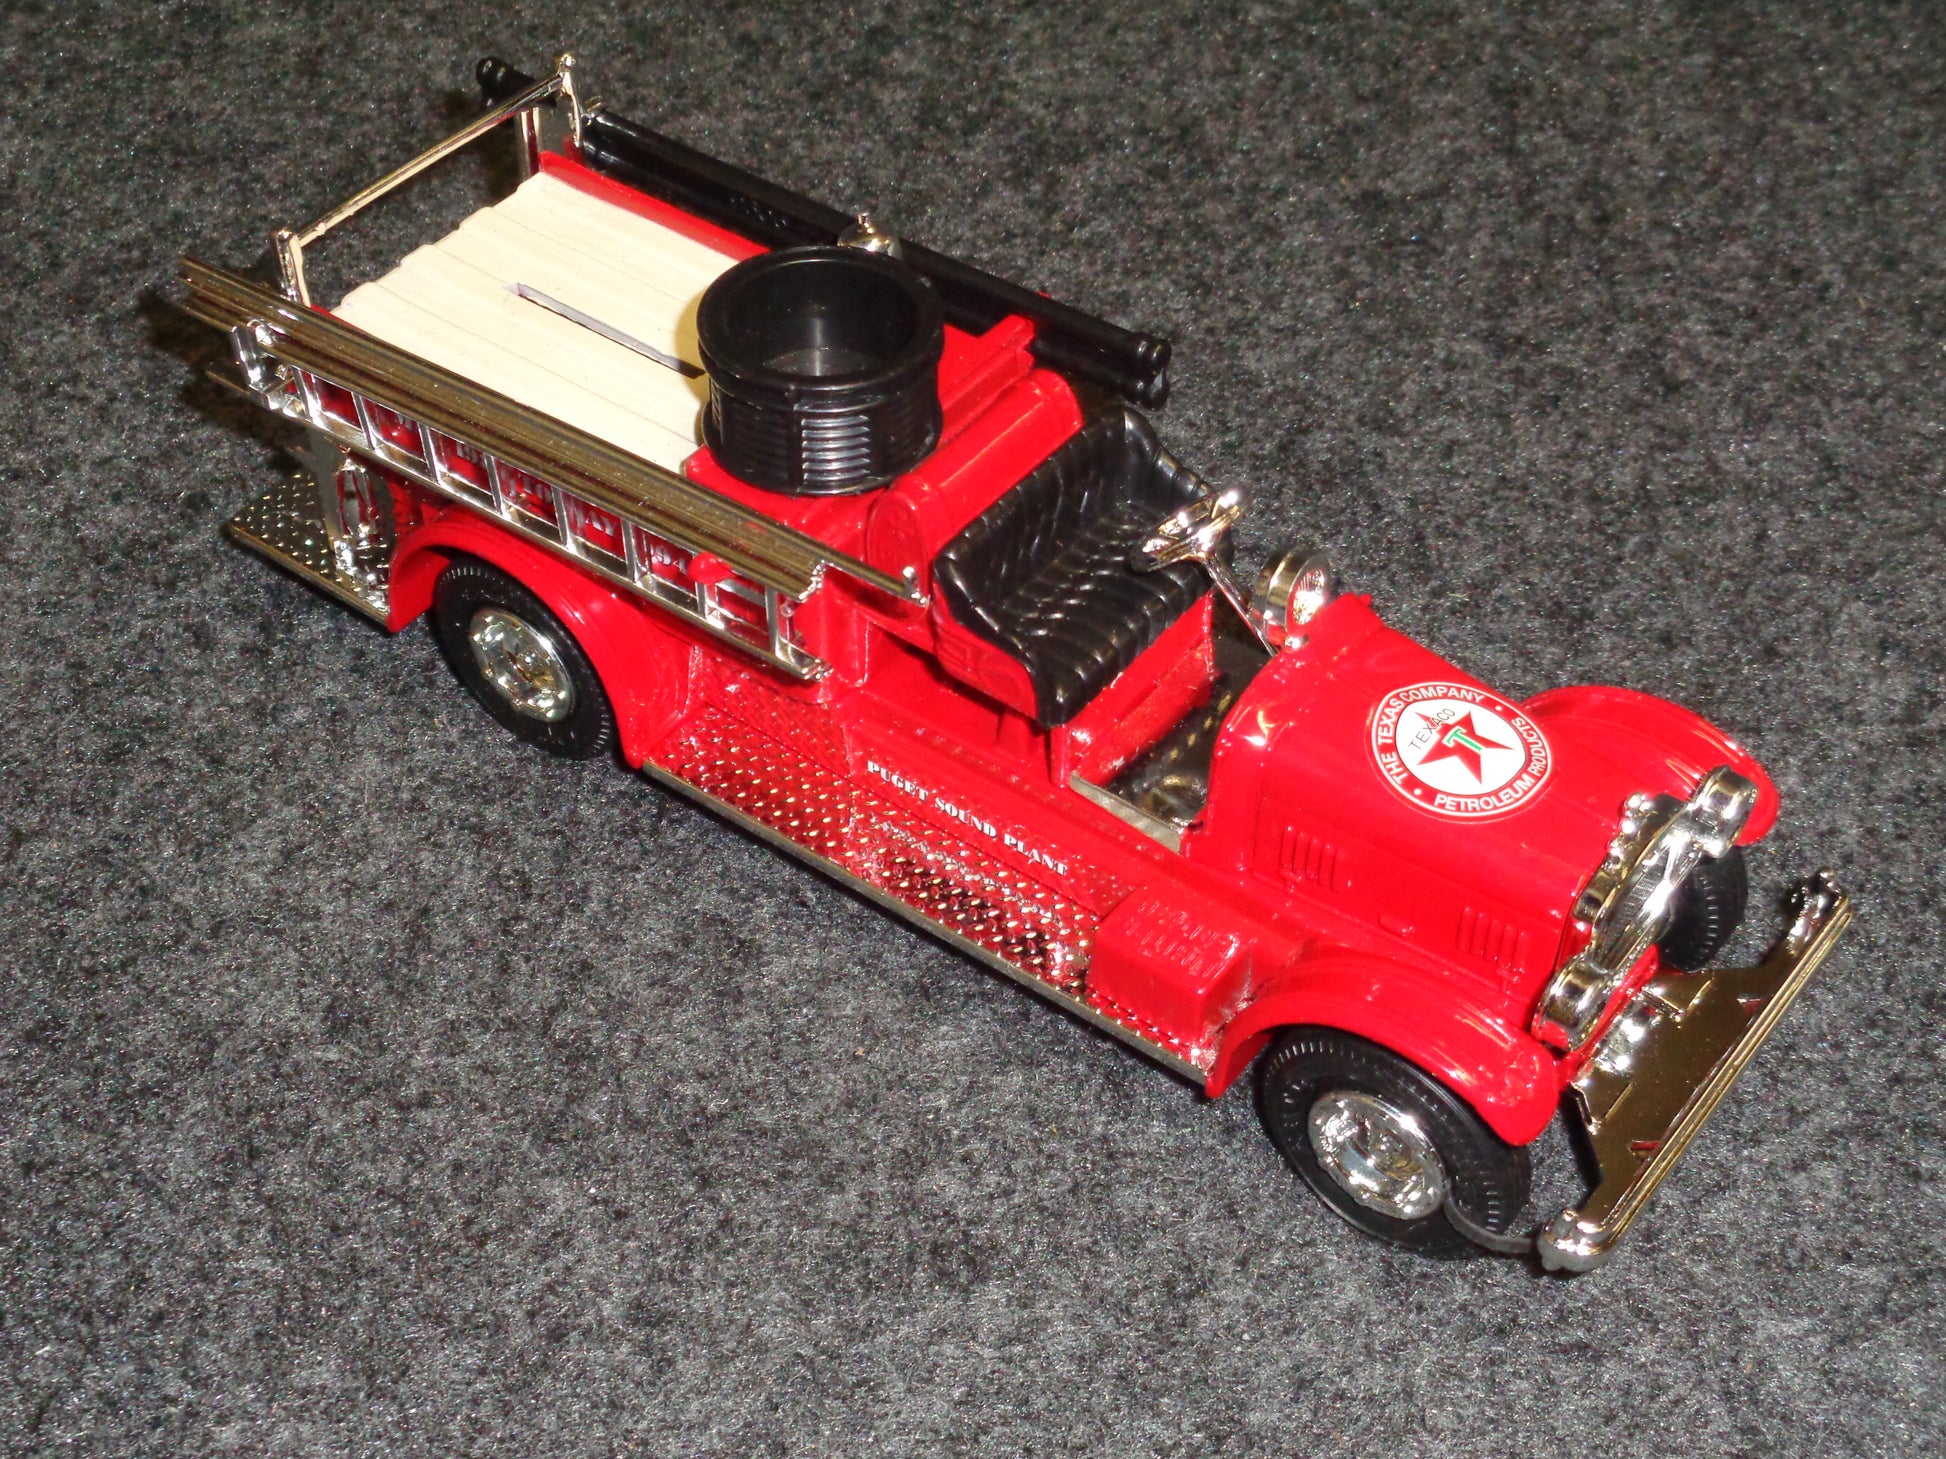 Texaco Puget Sound Plant 1926 Seagrave Fire Truck